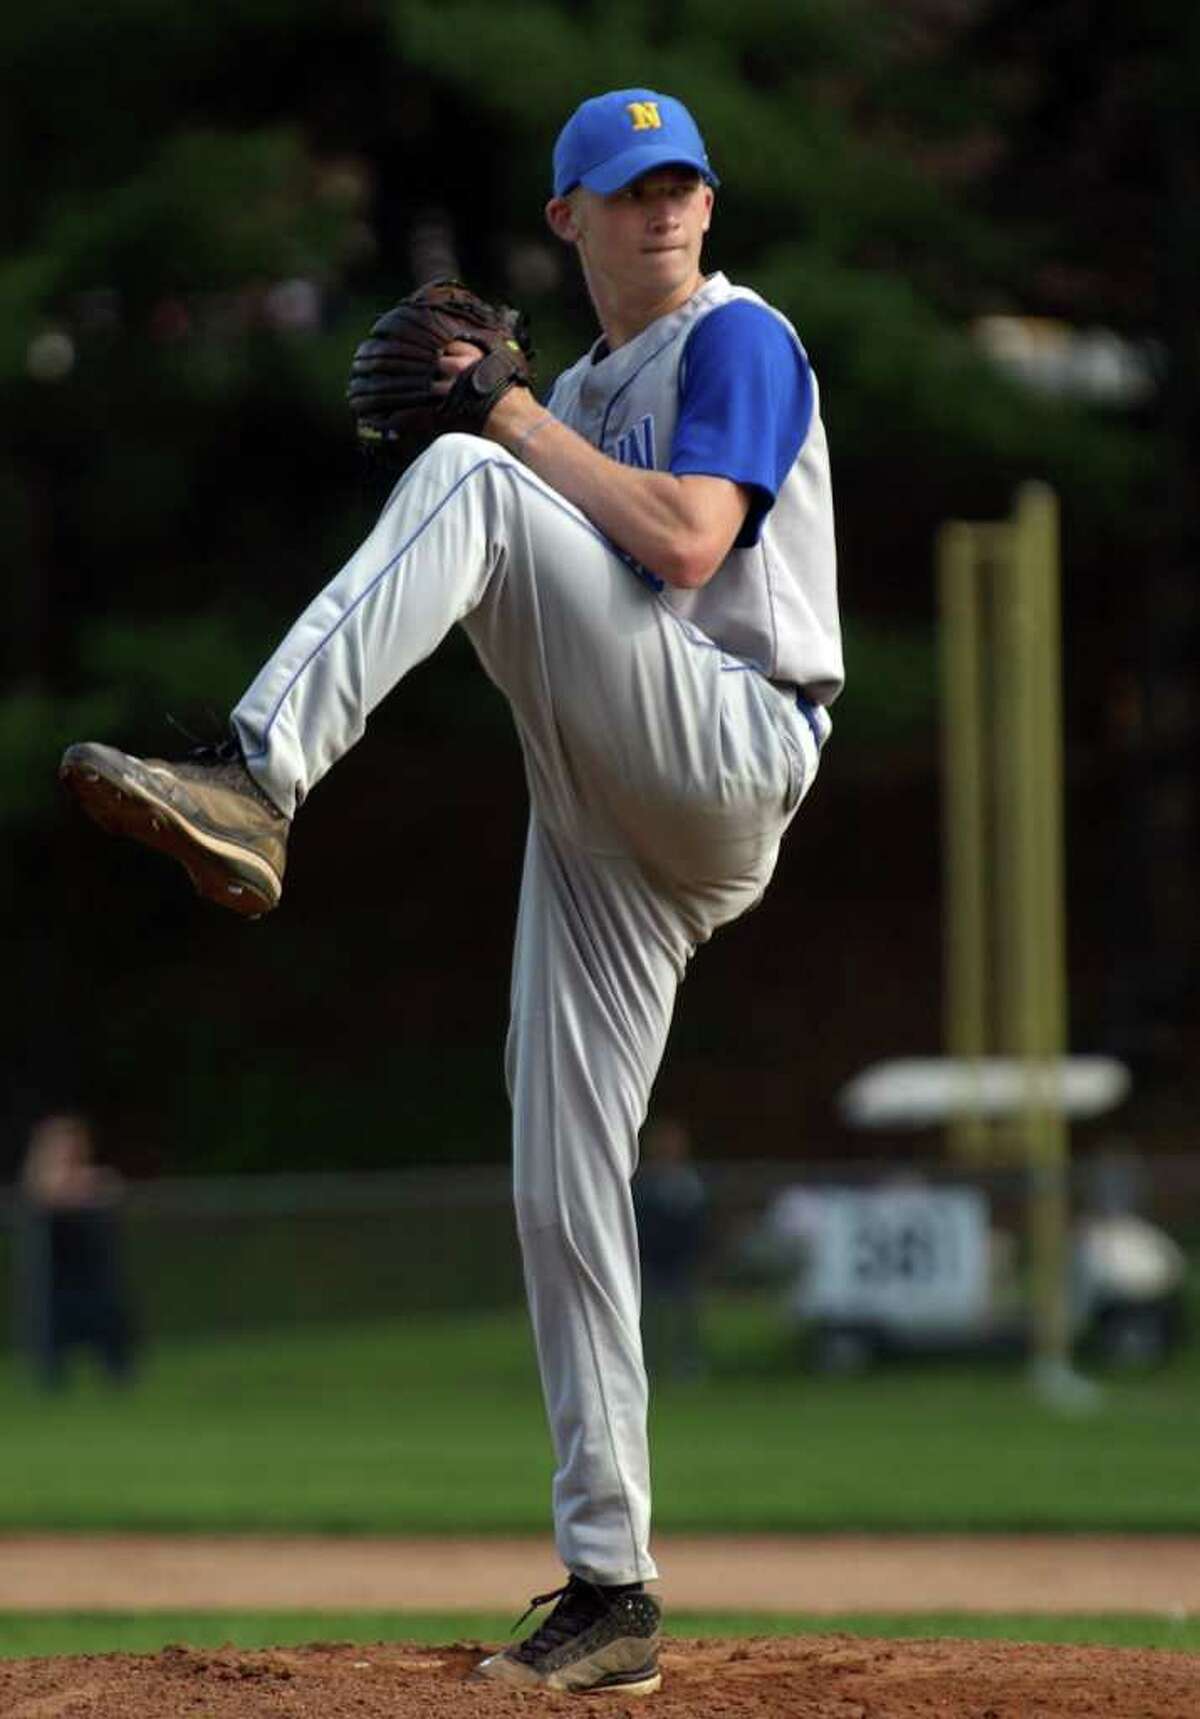 Newtown's Kyle Wilcox pitches during boys baseball action against Masuk in Monroe, Conn. on Wednesday May 11, 2011.